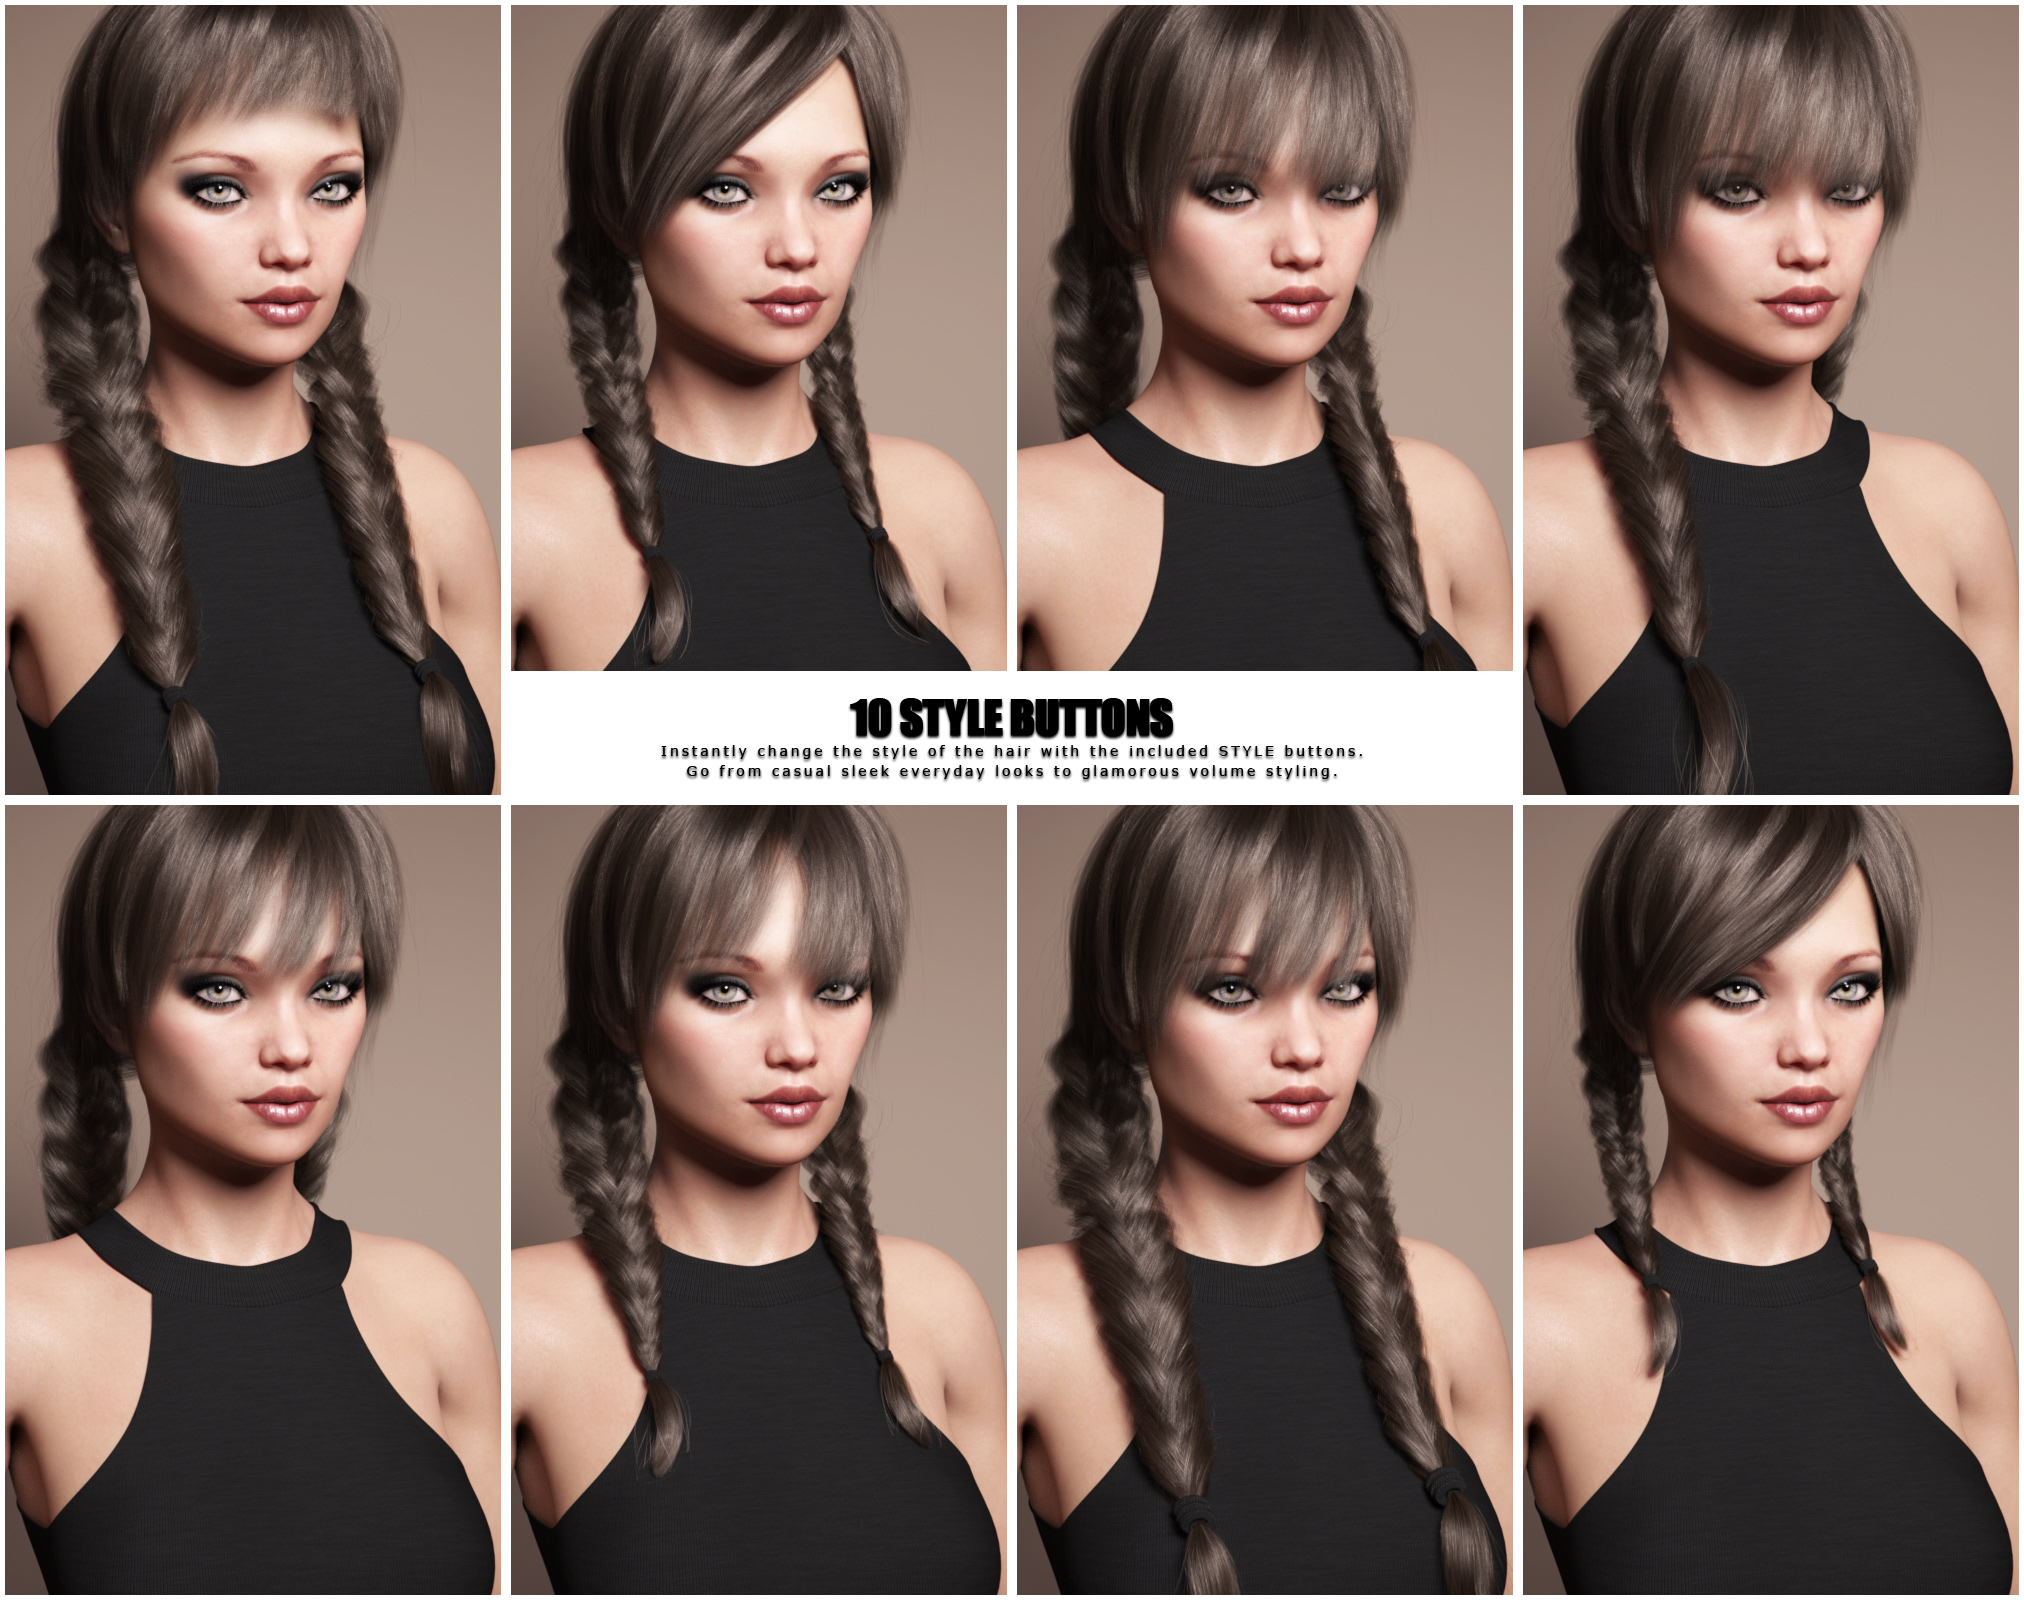 Madeline Tails Hair for Genesis 3 and 8 Female(s) by: outoftouch, 3D Models by Daz 3D